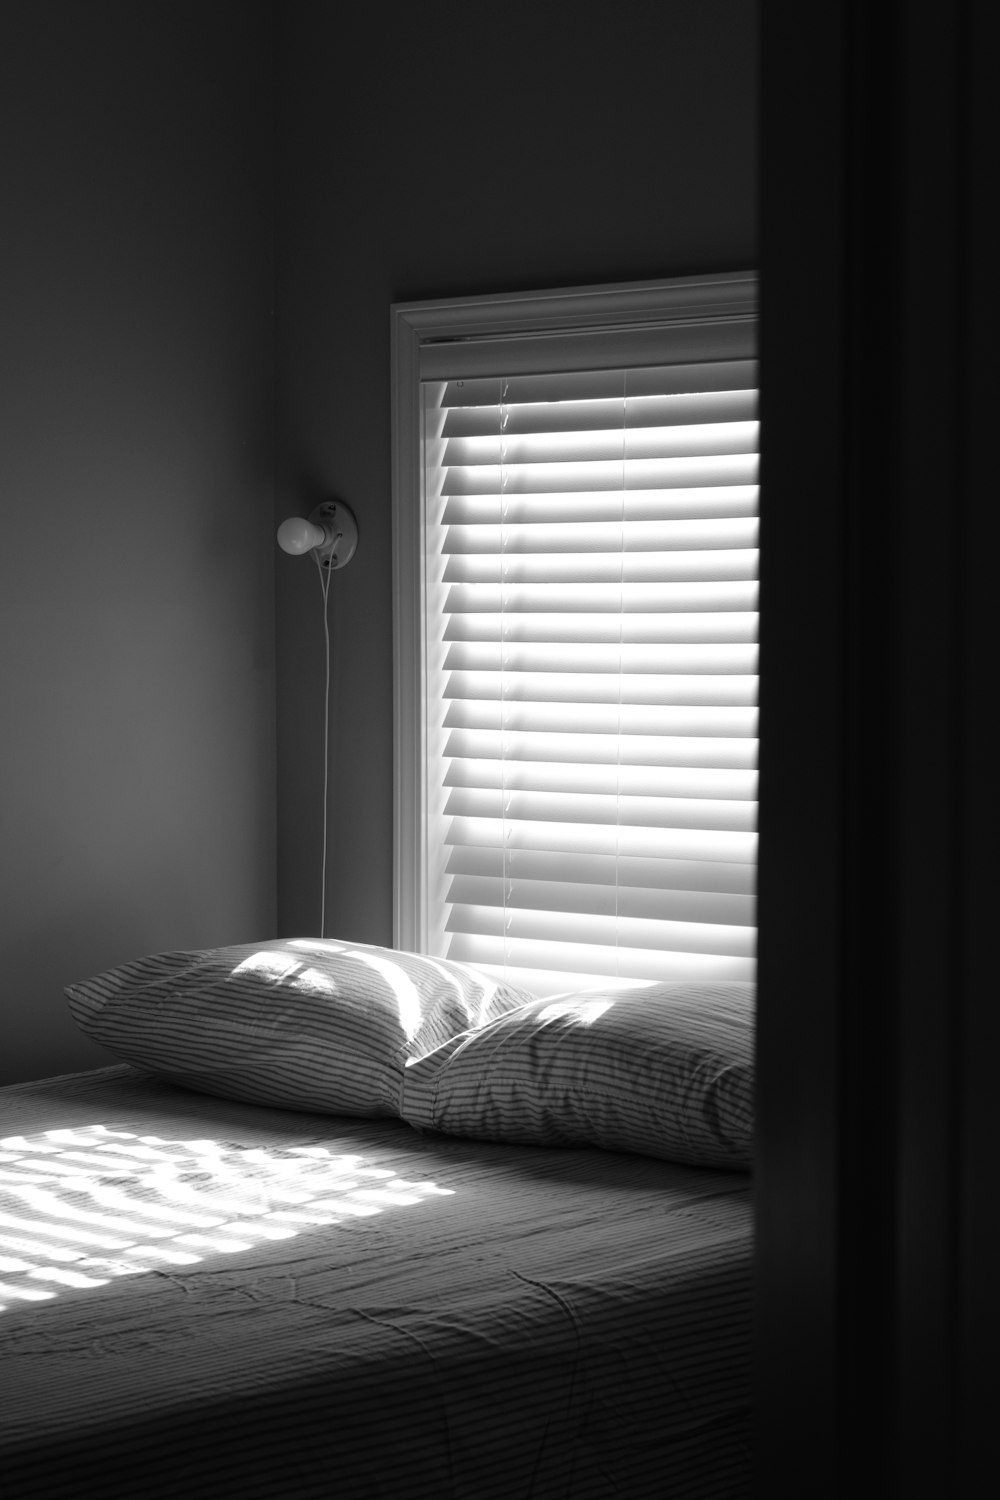 grayscale photo of bed with pillows